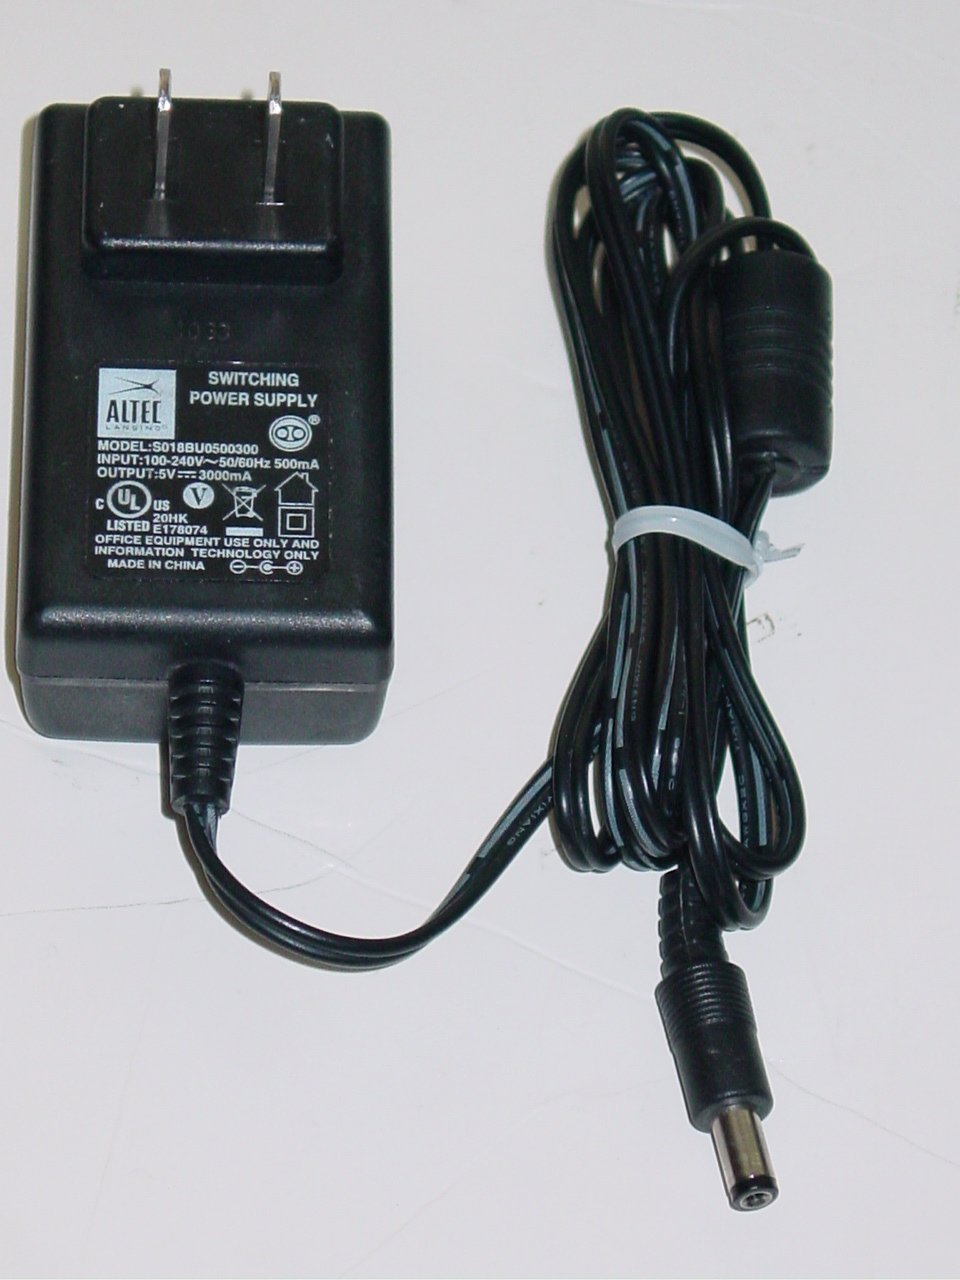 *NEW* Altec Lansing S018BU0500300 5V 3000mA AC DC Adapter POWER SUPPLY - Click Image to Close